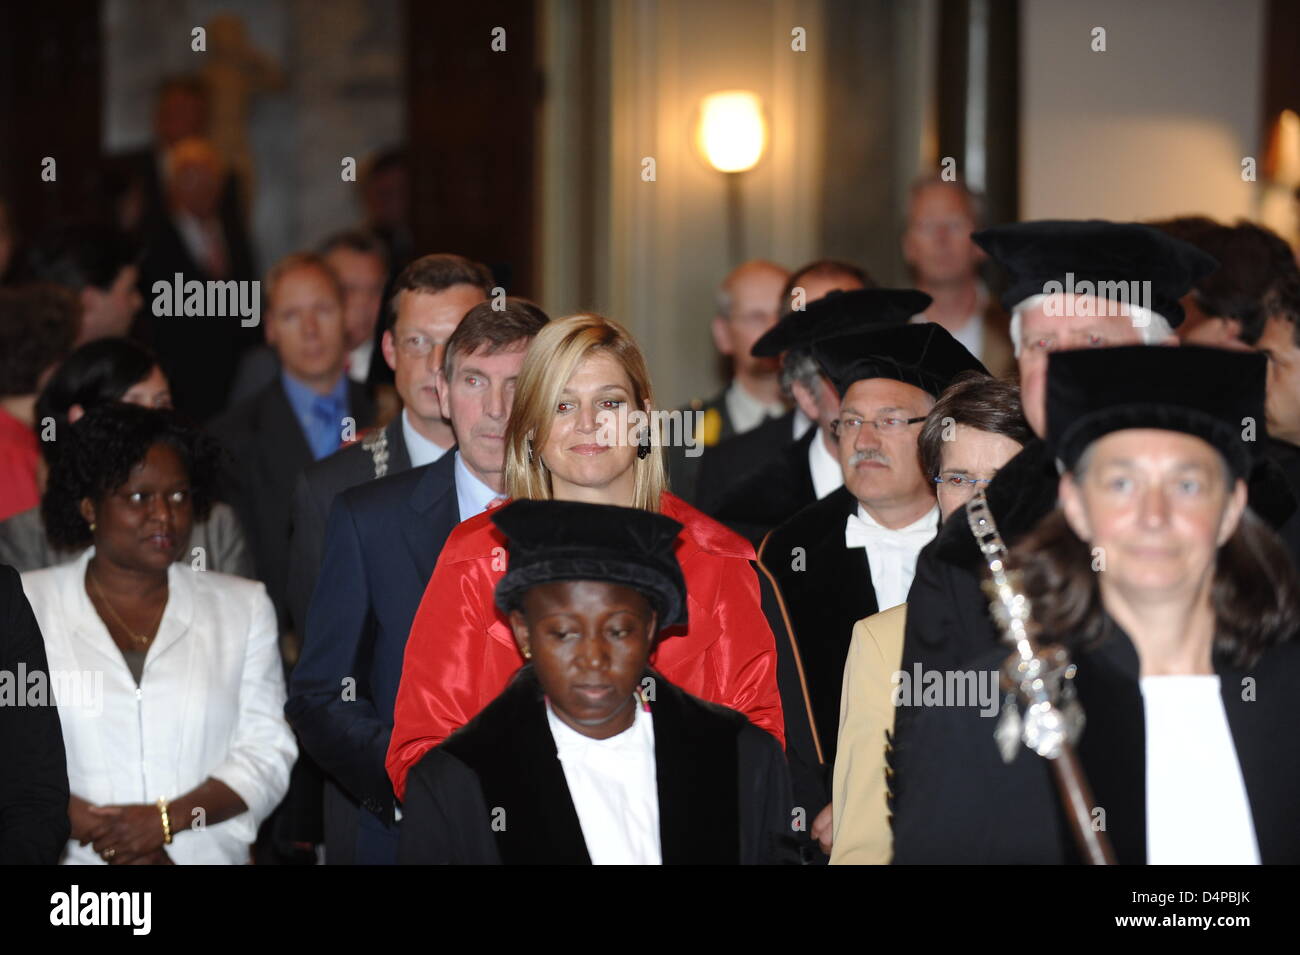 Princess Maxima of the Netherlands (C) attends the inauguration of Dr. Irene Agyepong to hold the Prince Claus Chair in the Academy Building in Utrecht, the Netherlands, 28 May 2009. Ageypong from Ghana is an expert in the field of health. At the moment she is regional director of the Ghana Health Service. Photo: Hendrik Jan van Beek  (NETHERLANDS OUT) Stock Photo